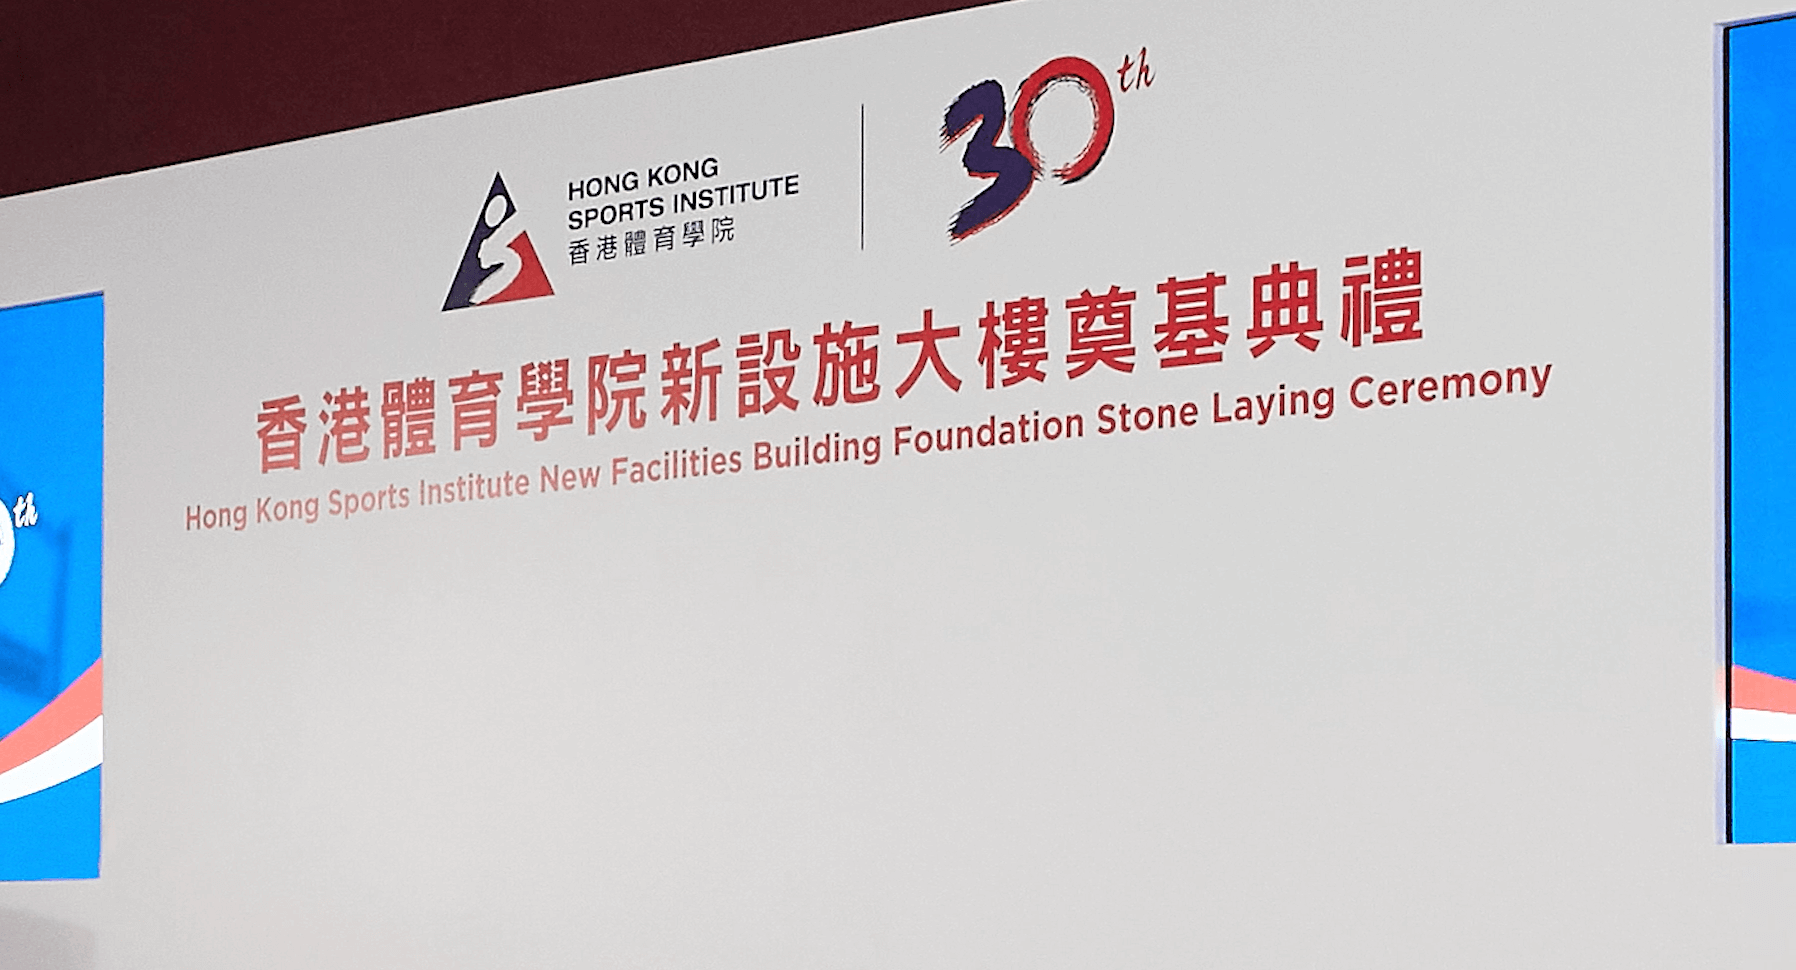 The Foundation Stone Laying Ceremony for the HKSI New Facilities Building